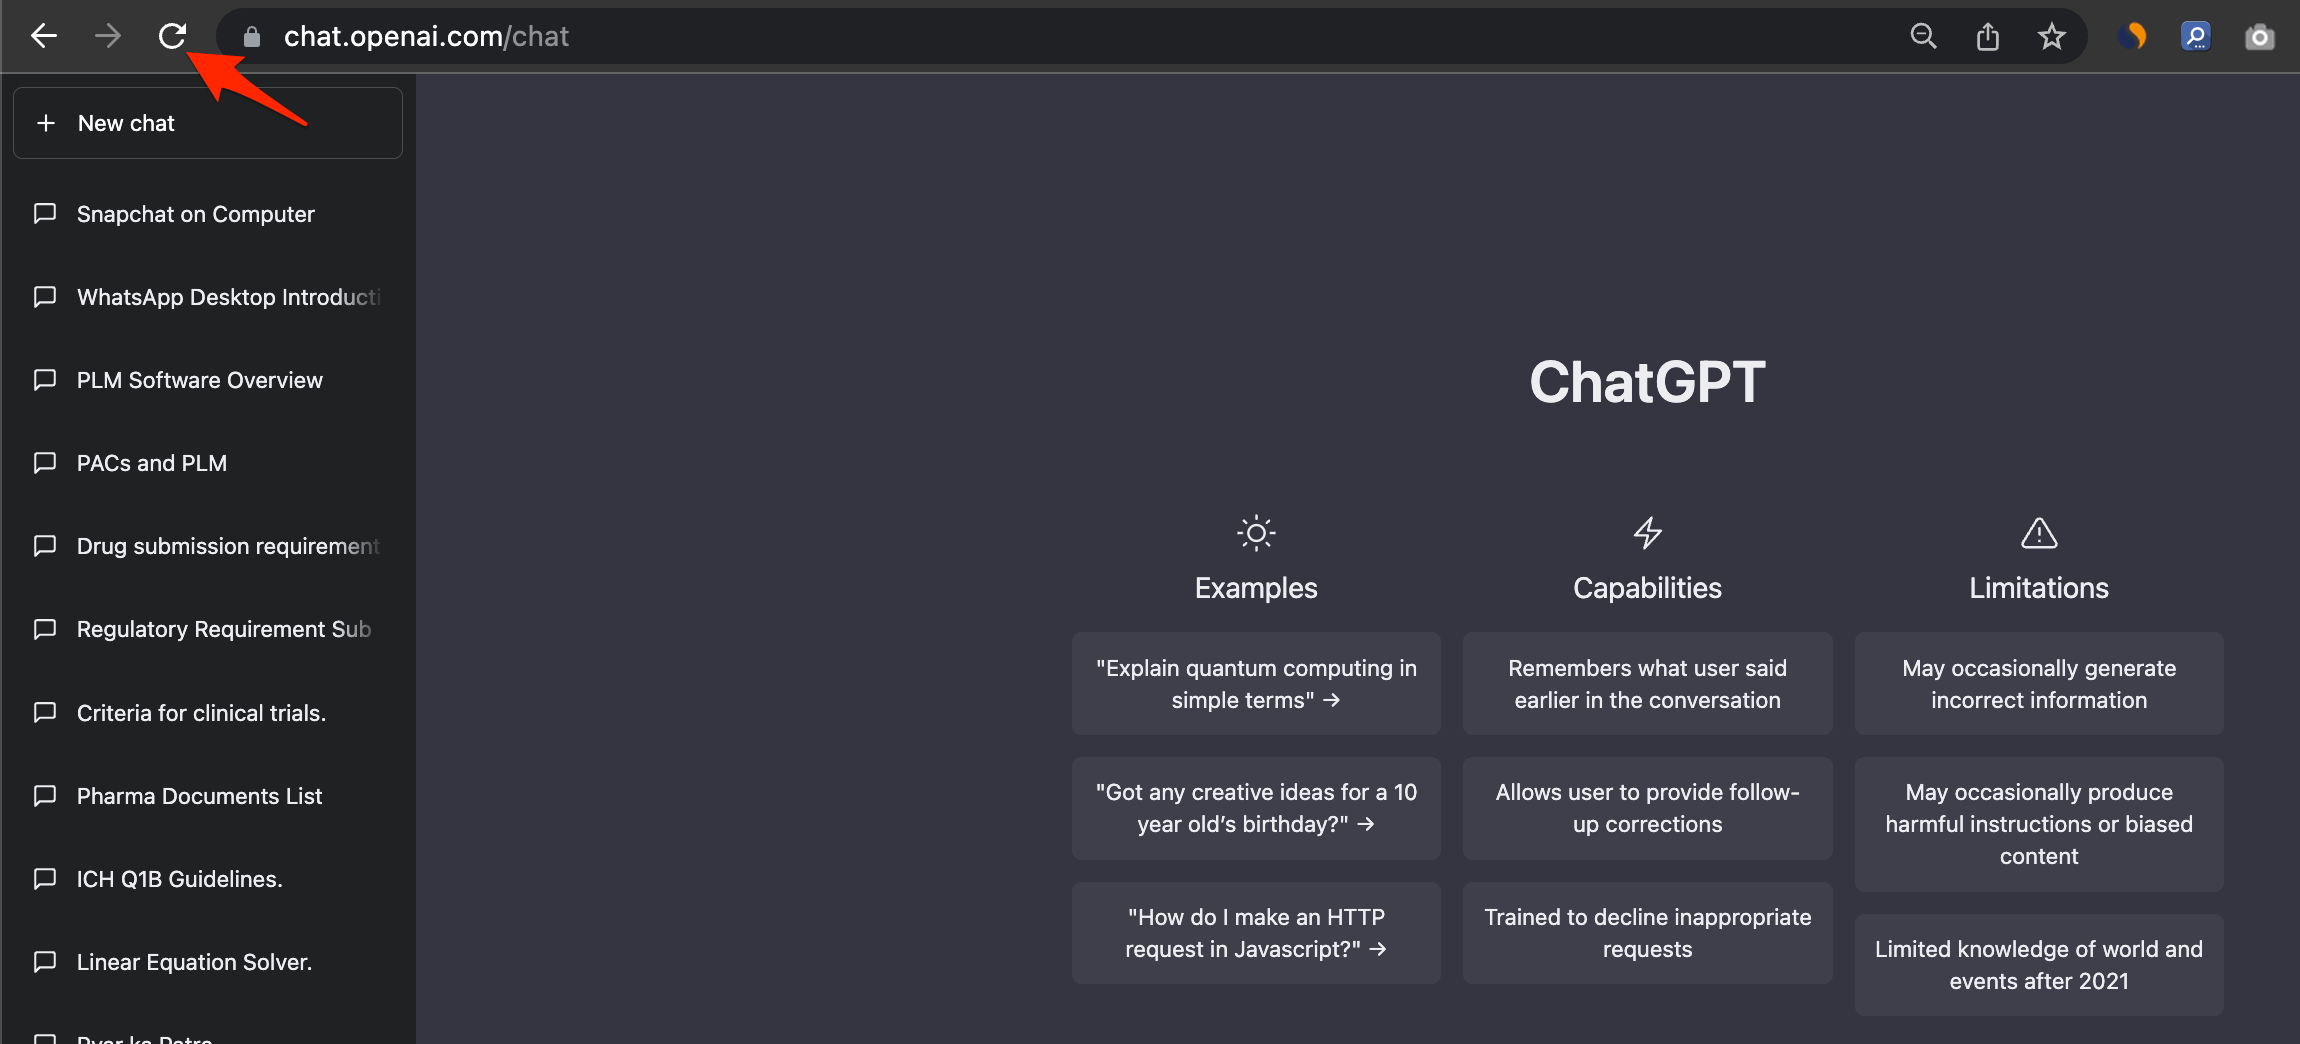 How to Fix ChatGPT History Not Loading Issue? 2